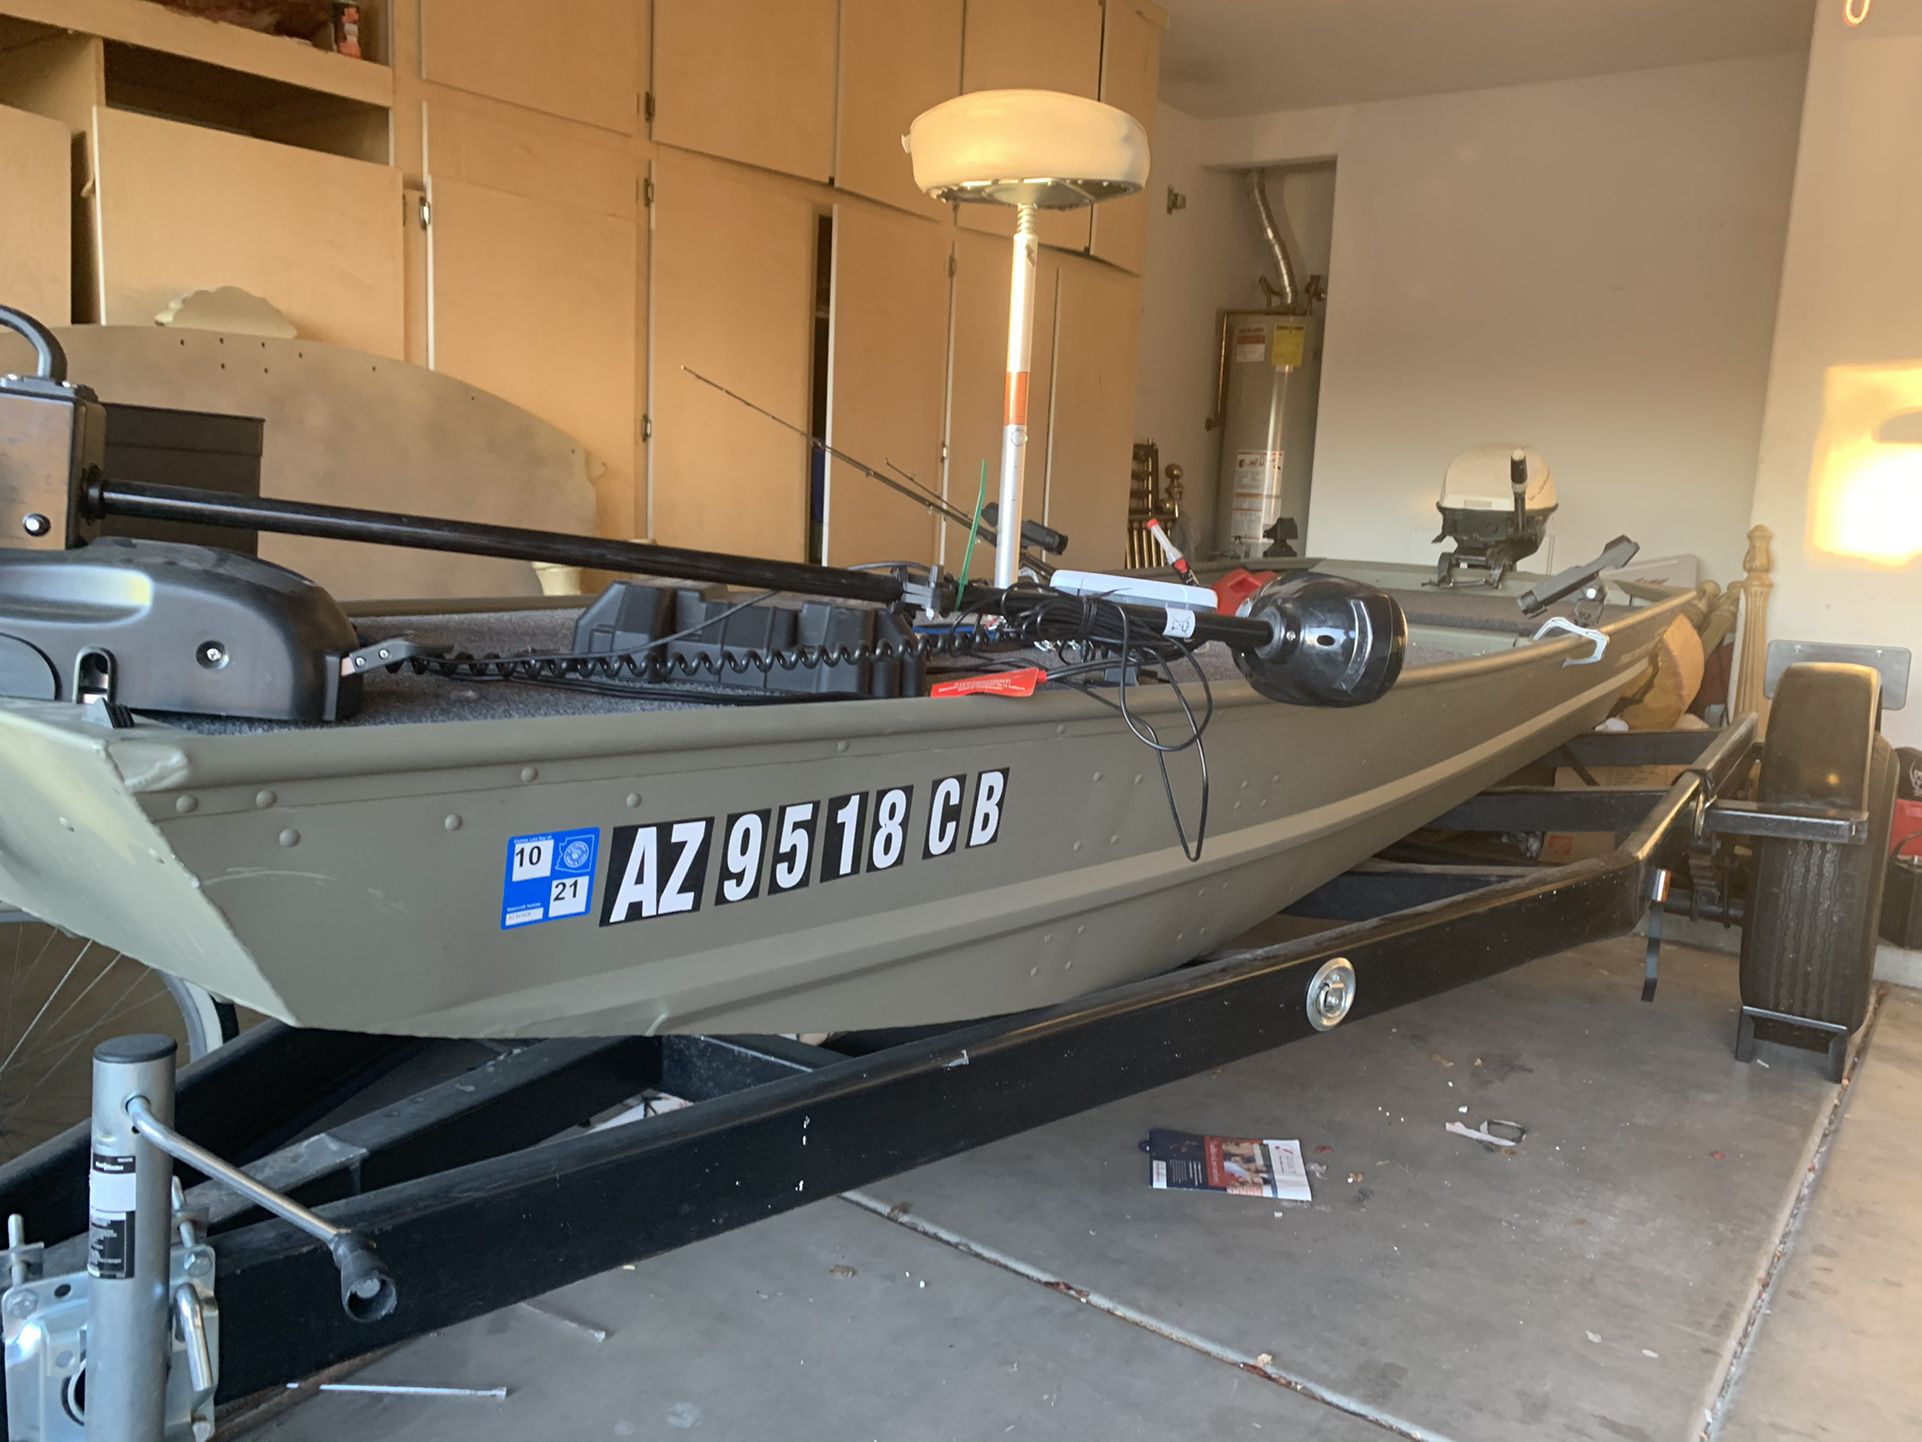 2020 Topper Jon Boat USED 3 TIMES (TRAILER INCLUDED)